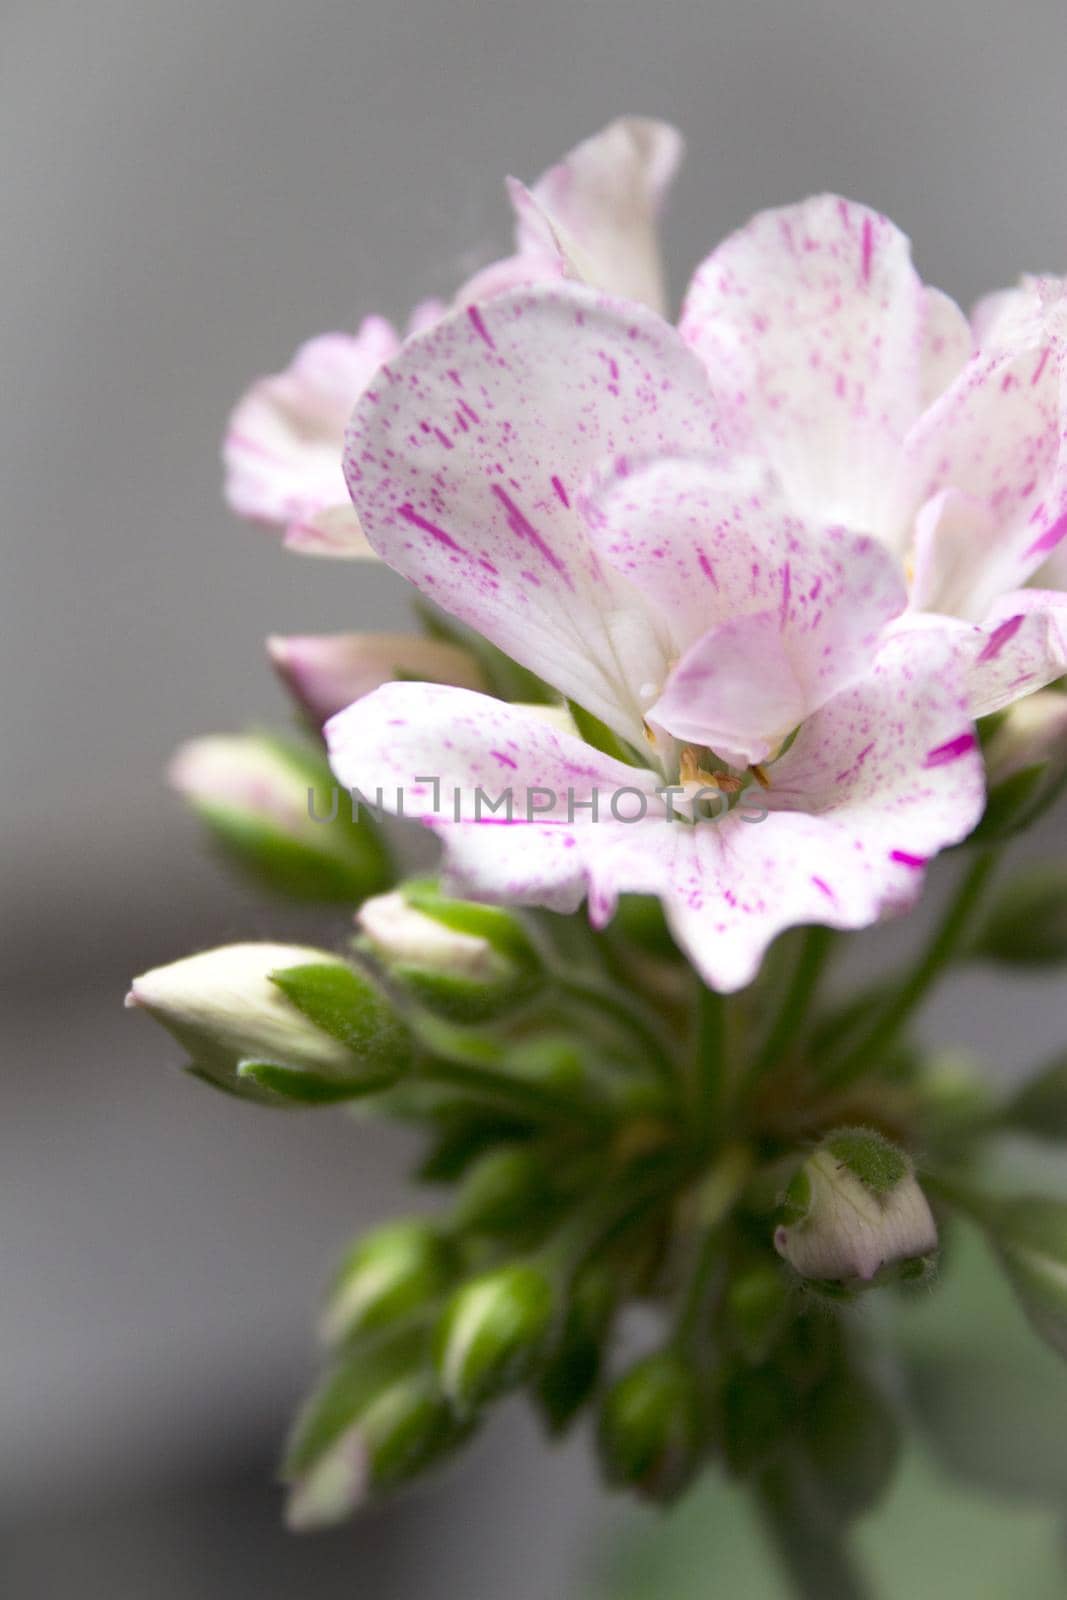 Geranium flower in white and pink colors. No people